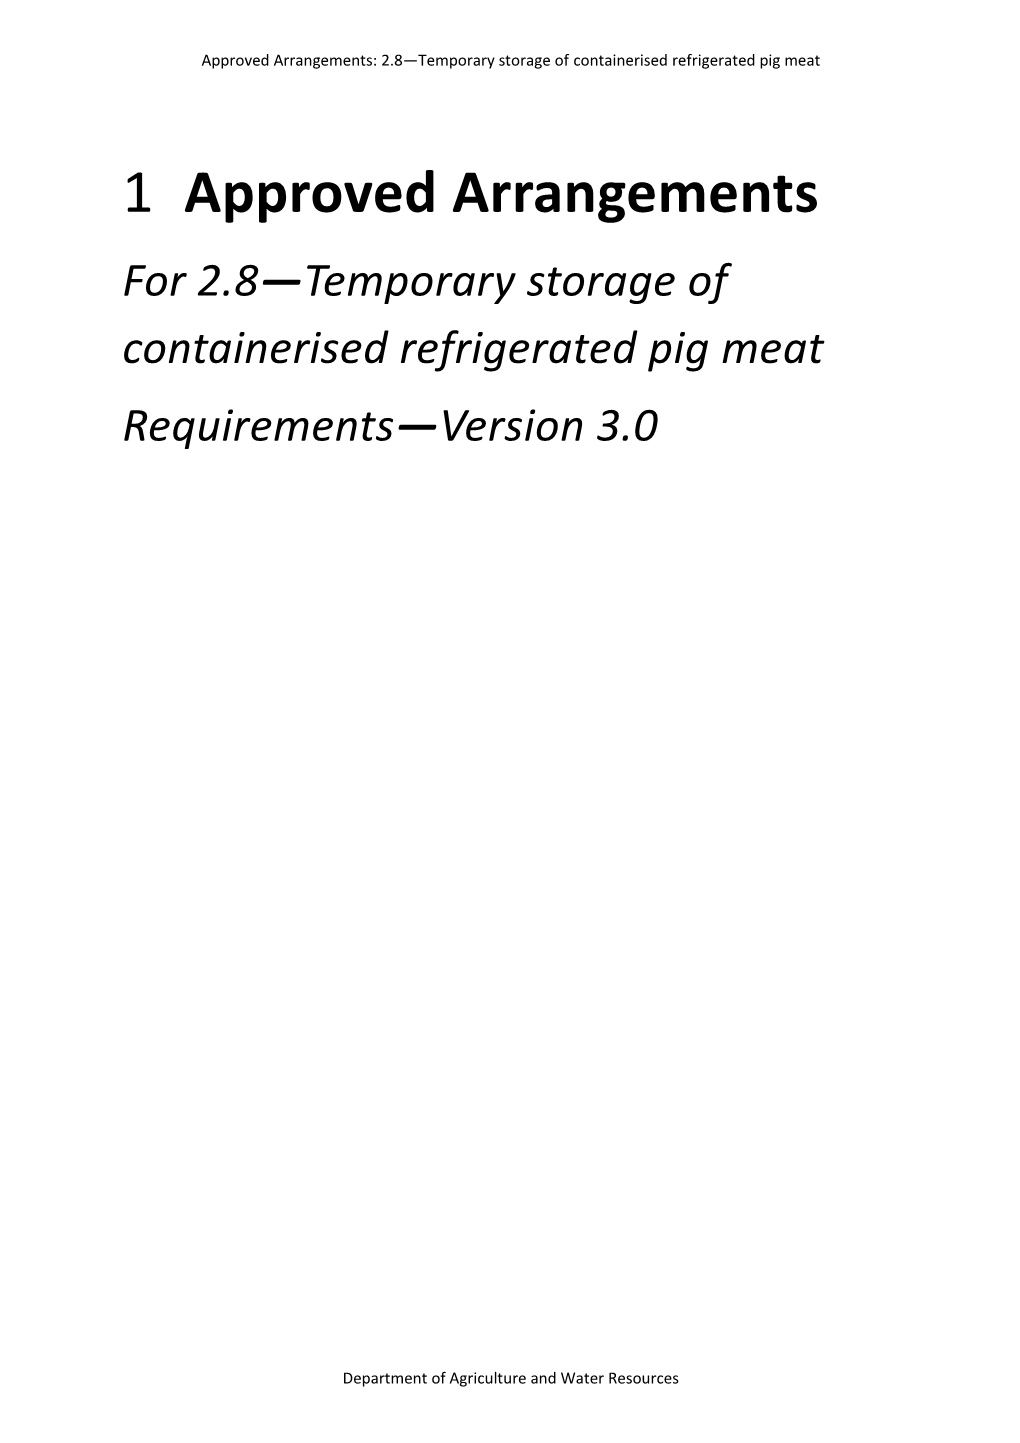 Approved Arrangements for 2.8 - Temporary Storage of Containerised Refrigerated Pig Meat